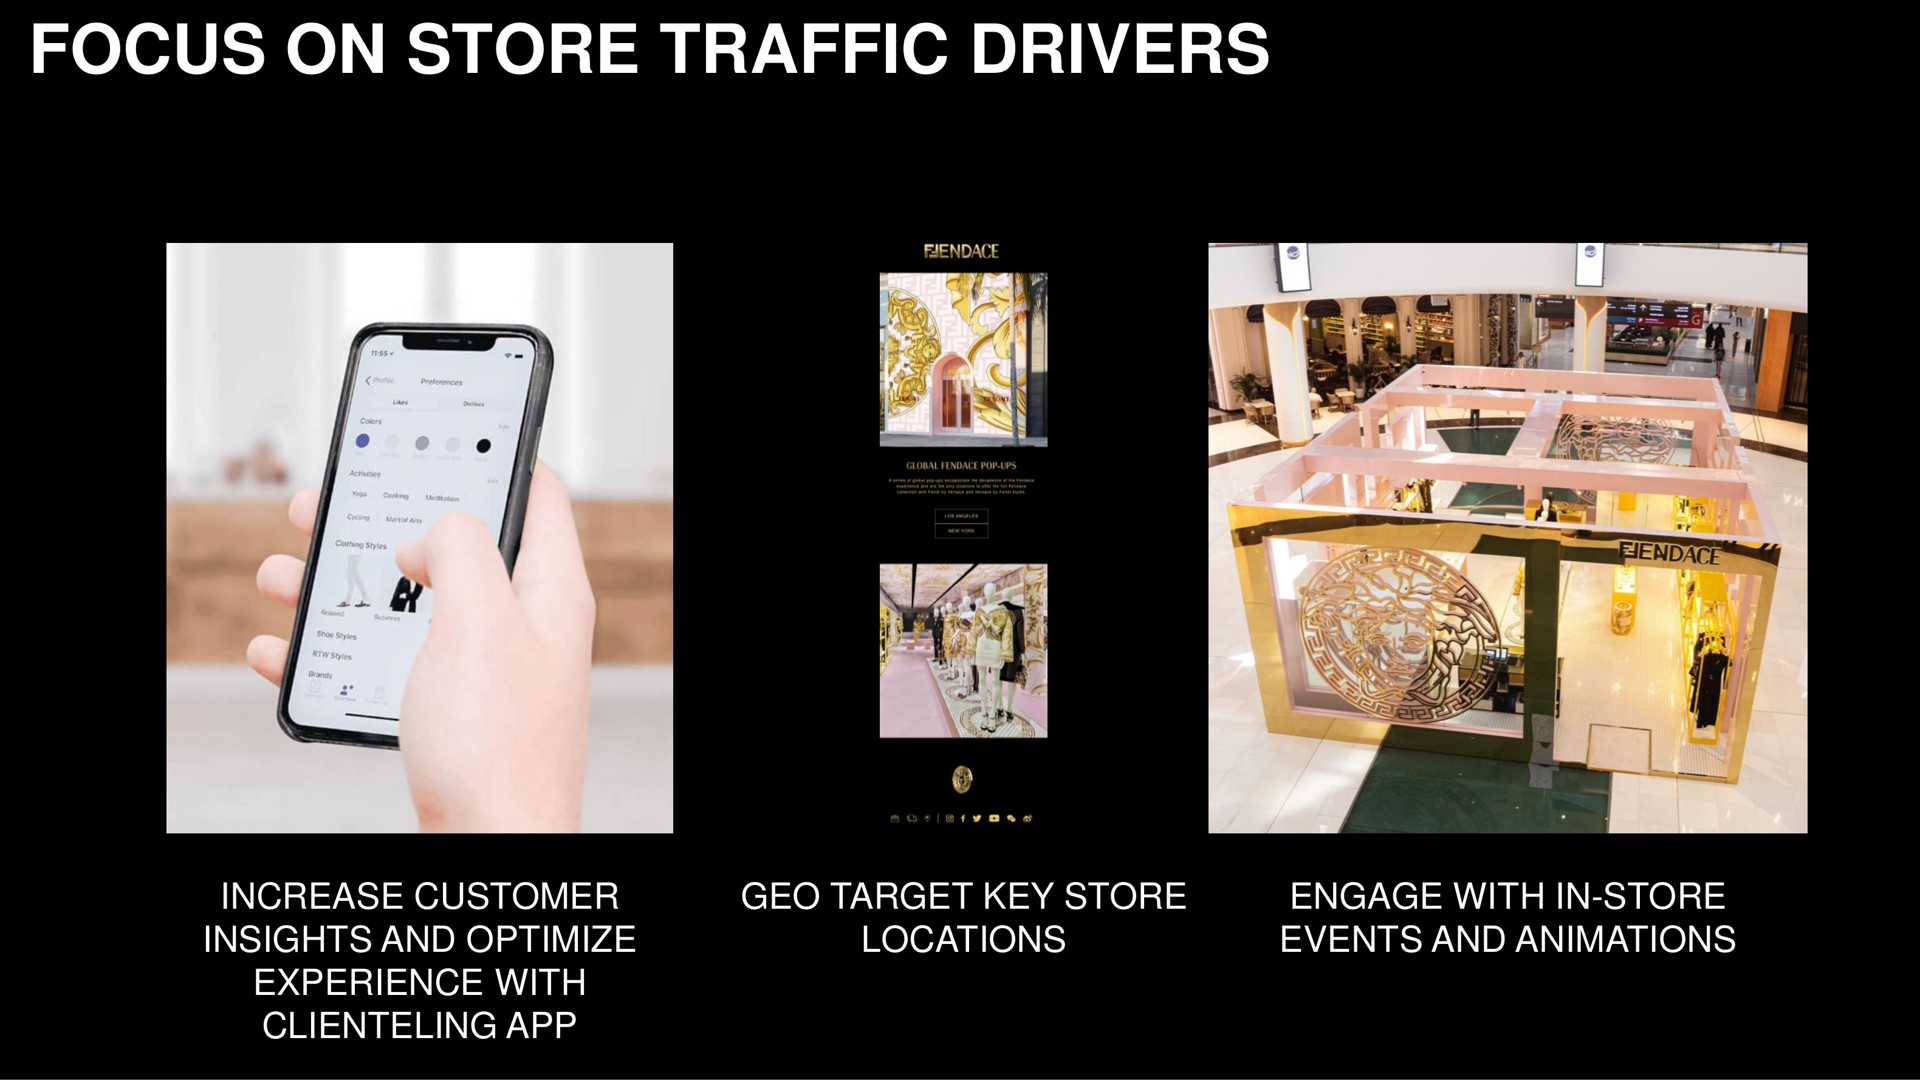 focus on store traffic drivers a increase customer insights and optimize experience with geo target key locations engage with in store events and animations | Capri Holdings